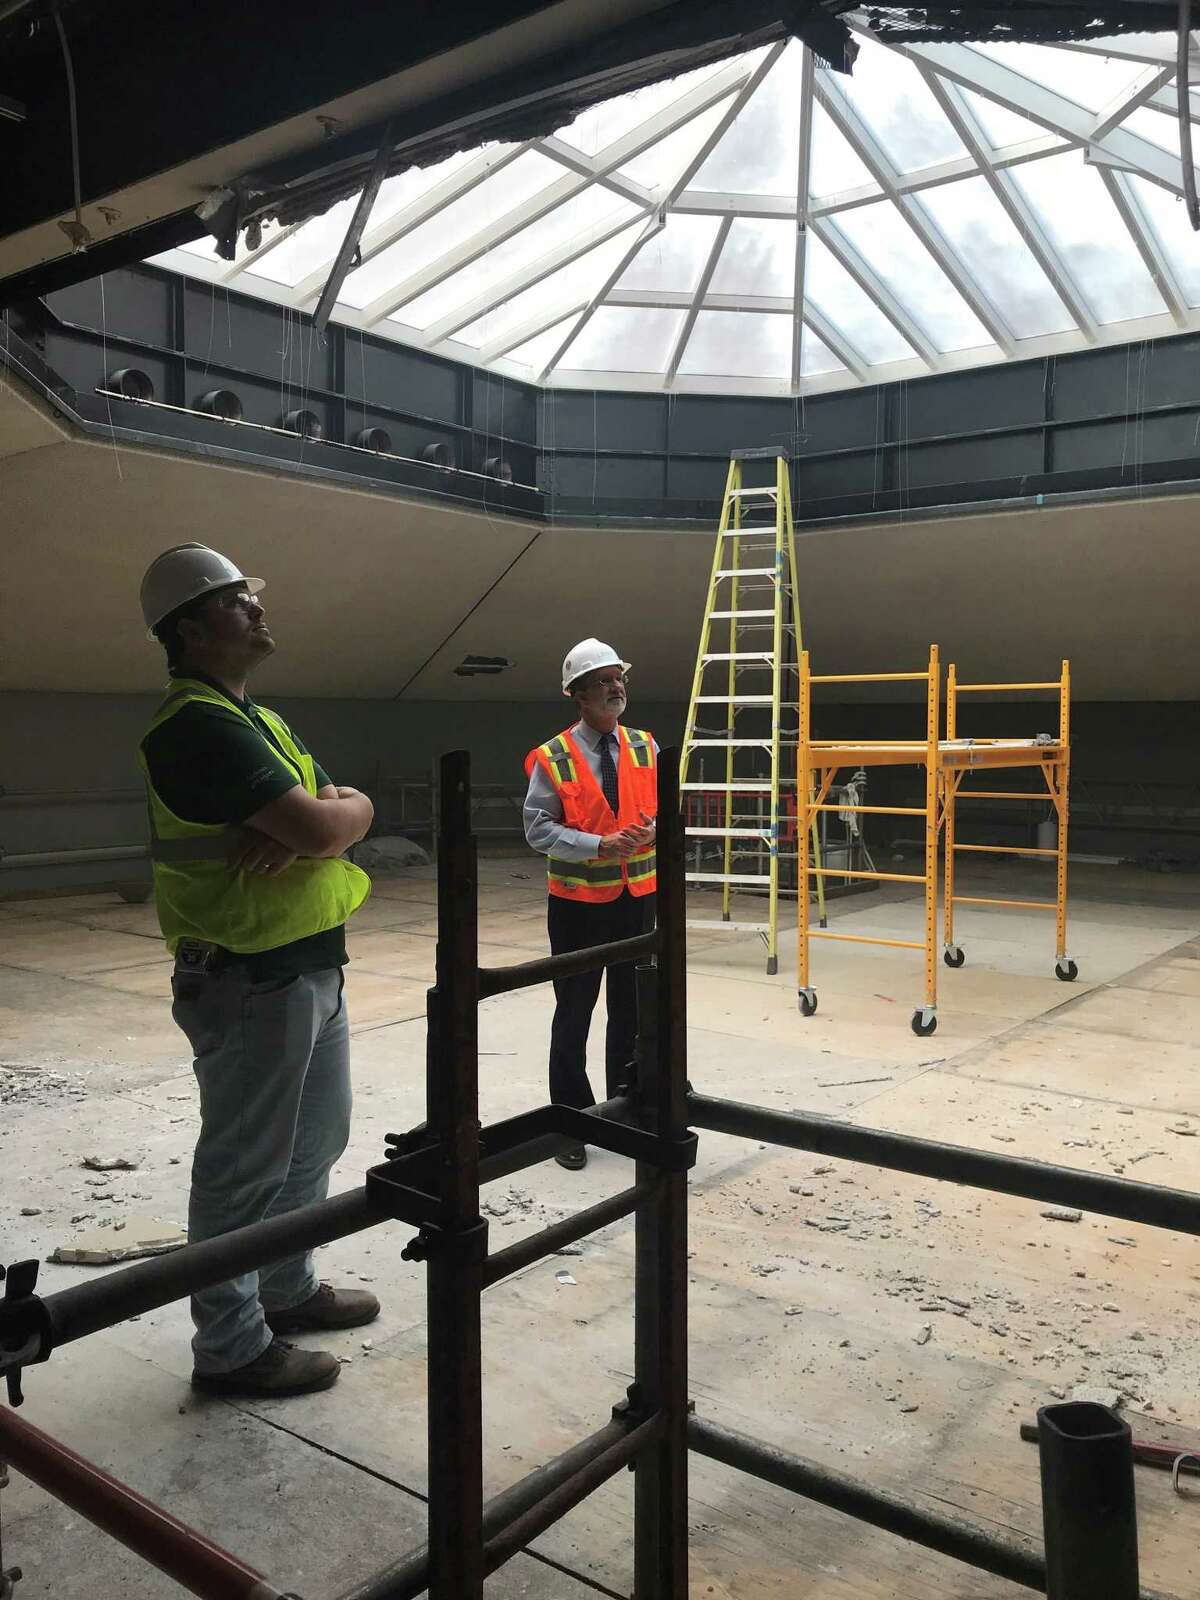 Marshall McBurnett, a project engineer with Linbeck, left, looks at renovation work being done near the ceiling of the Rothko Chapel with Rothko executive director David Leslie on Tuesday, April 2, 2019.